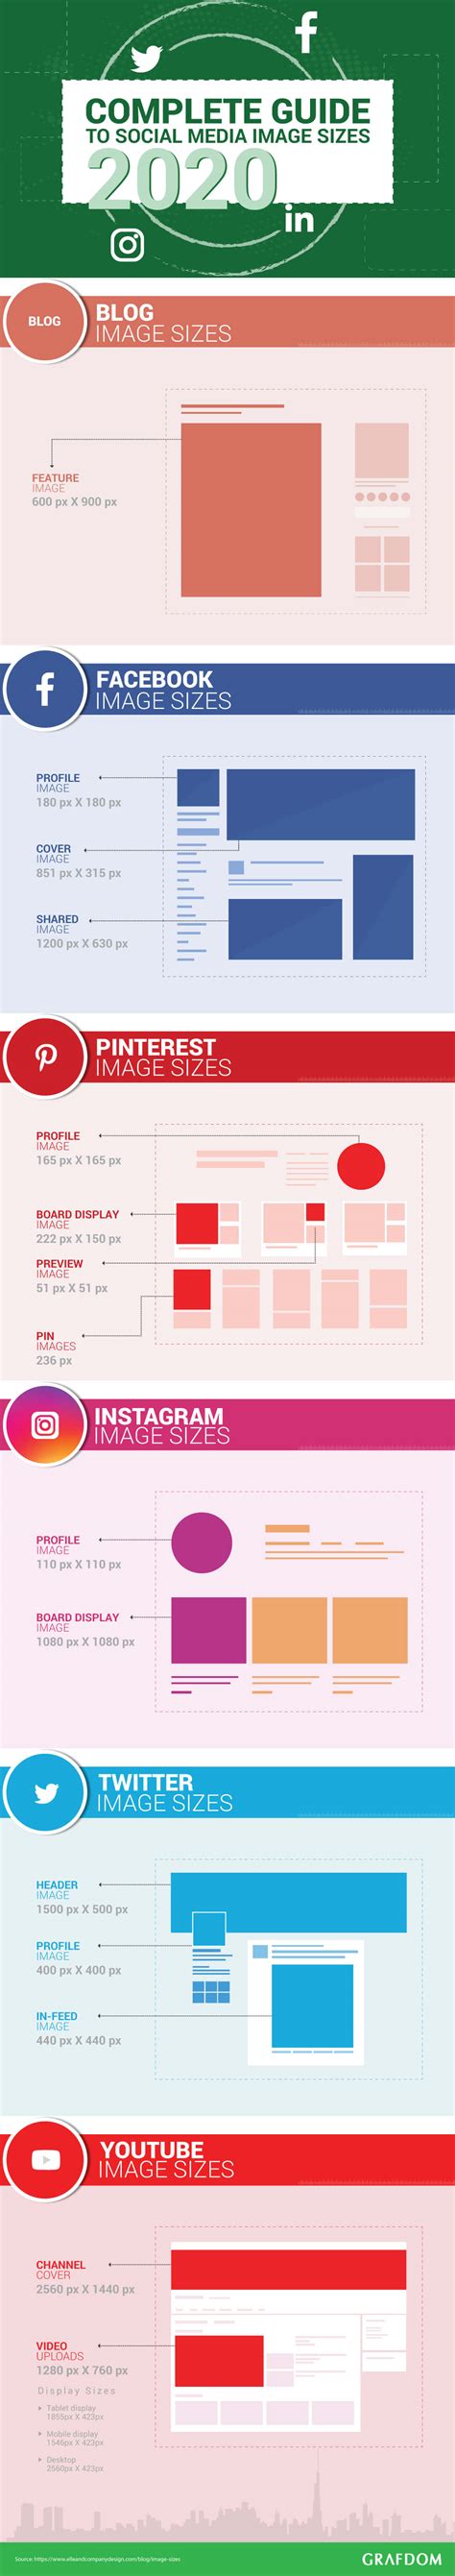 Social Media Image Sizes Cheat Sheet 2020 Complete